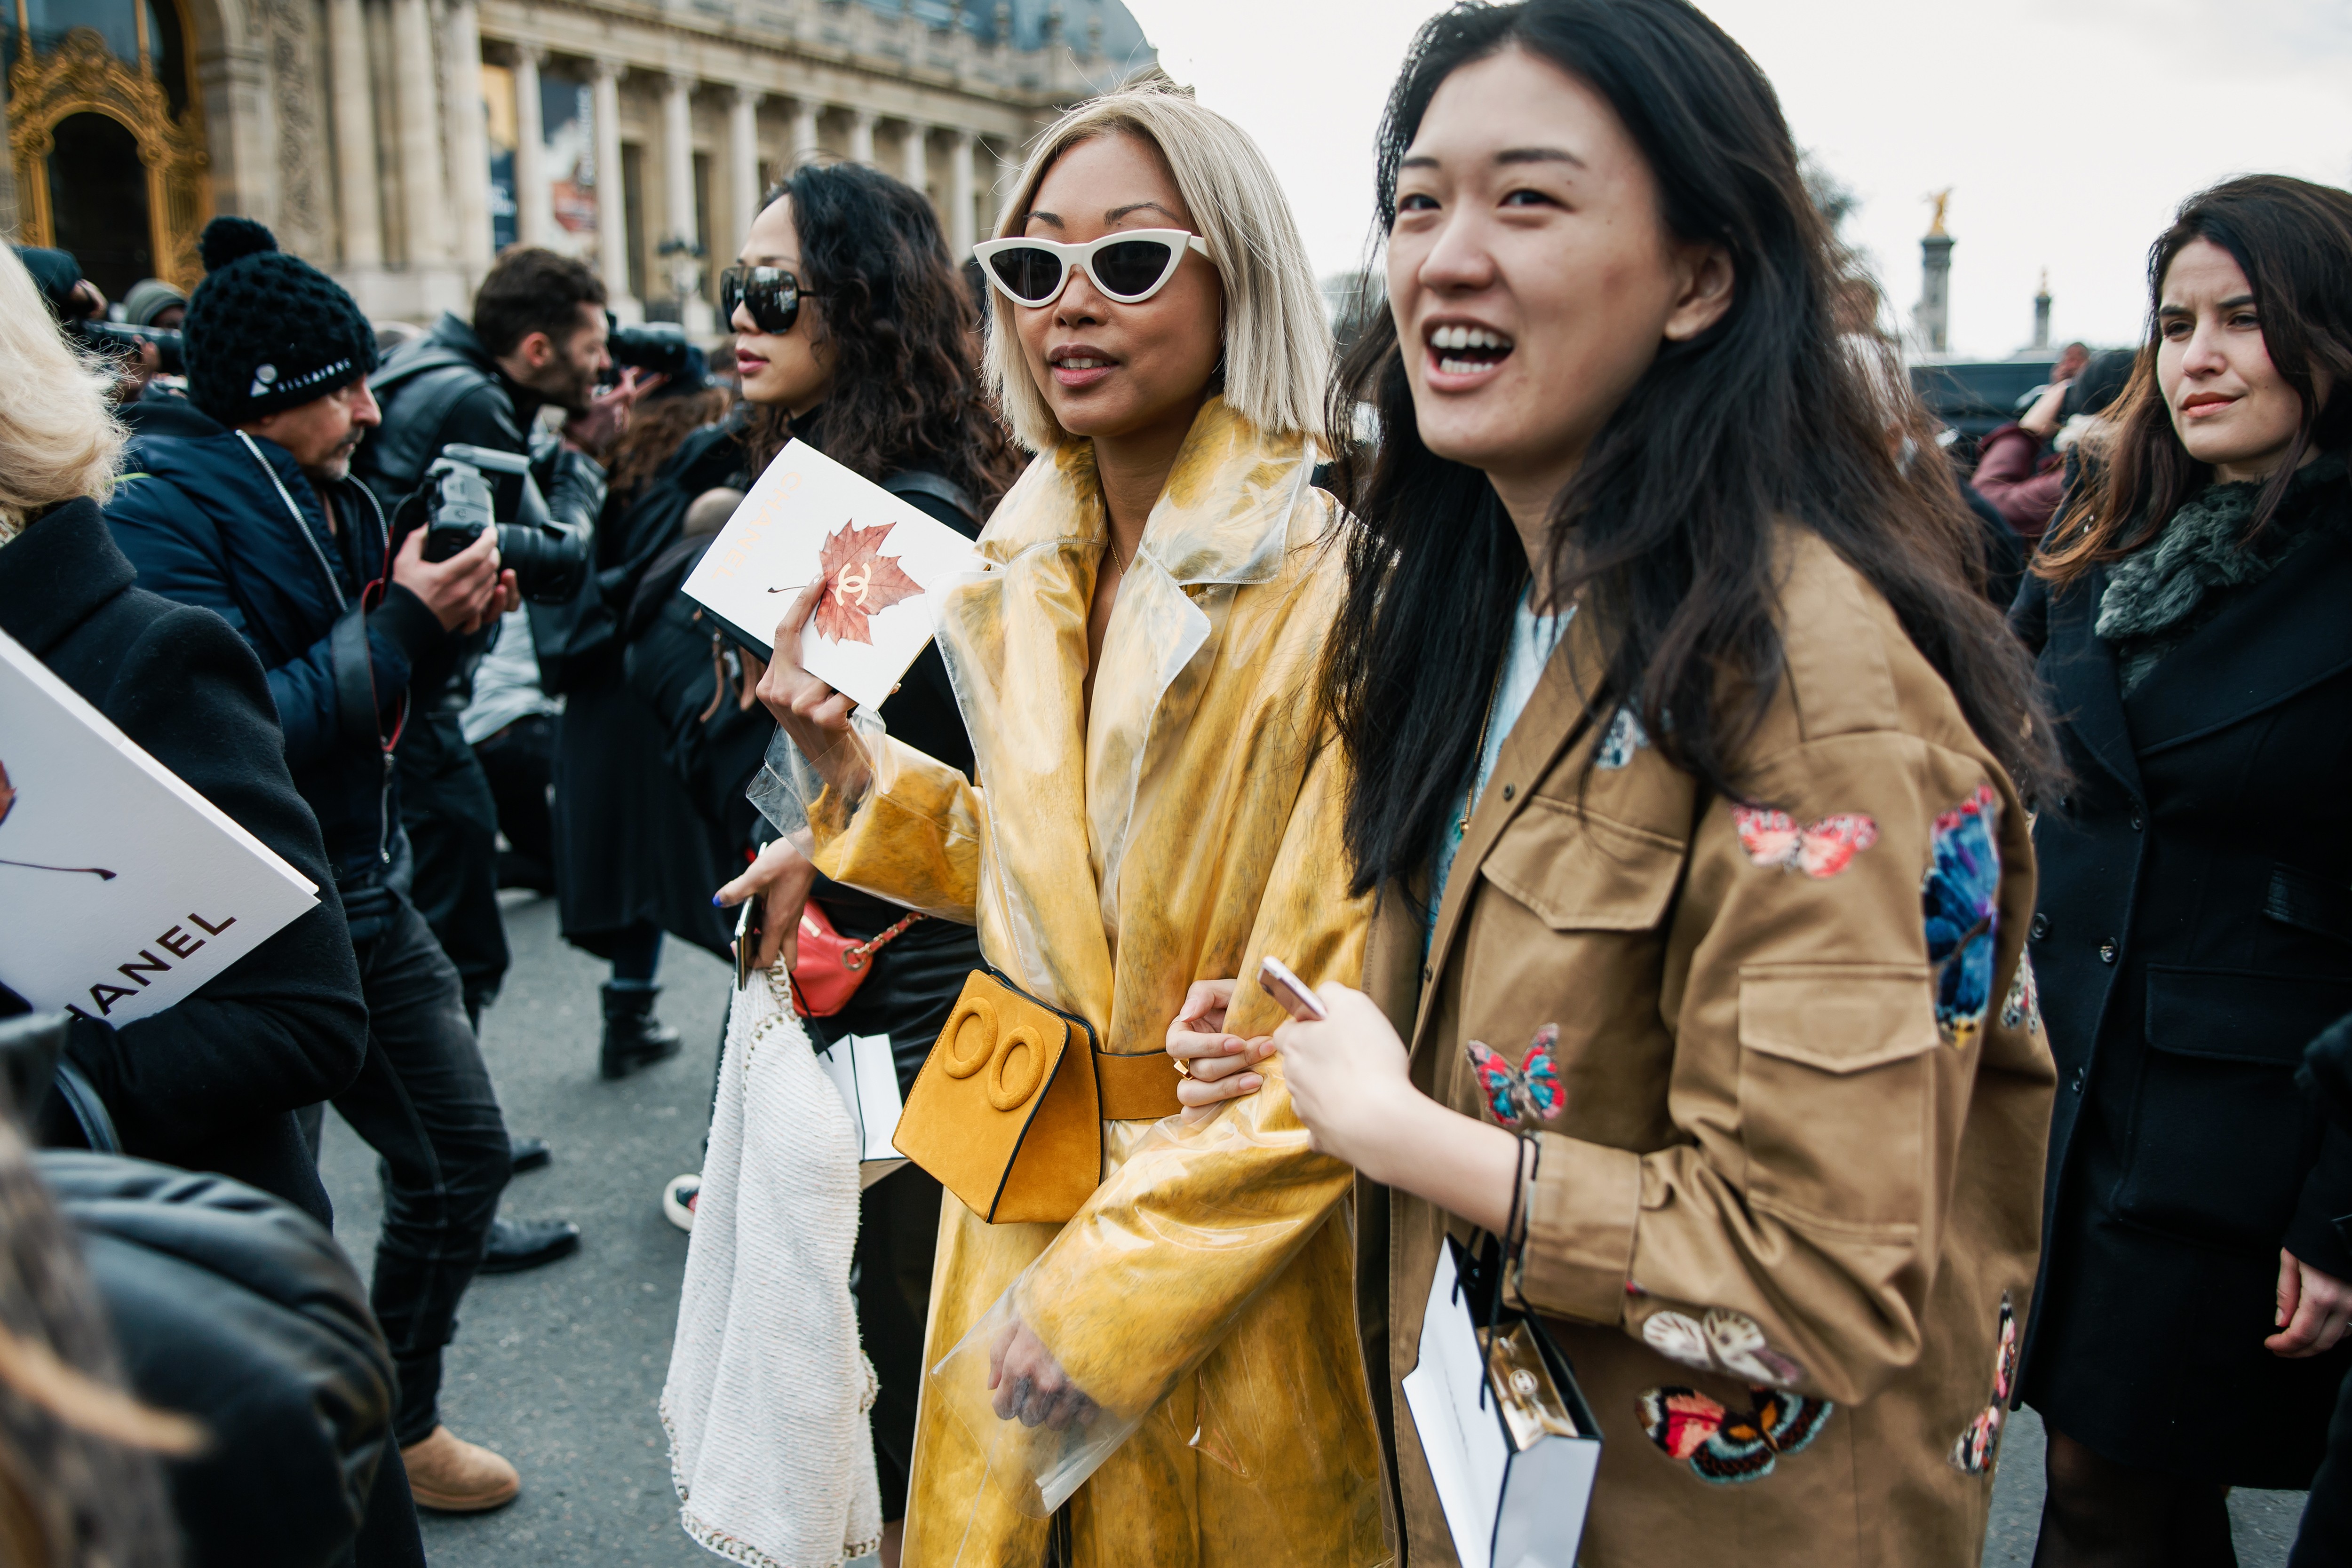 Asian guests attending a recent Paris fashion week show. Concerns over the coronavirus outbreak mean many Chinese fashion industry figures will not attend upcoming fashion weeks in London and Milan, watching and making orders online instead. Photo: Shutterstock